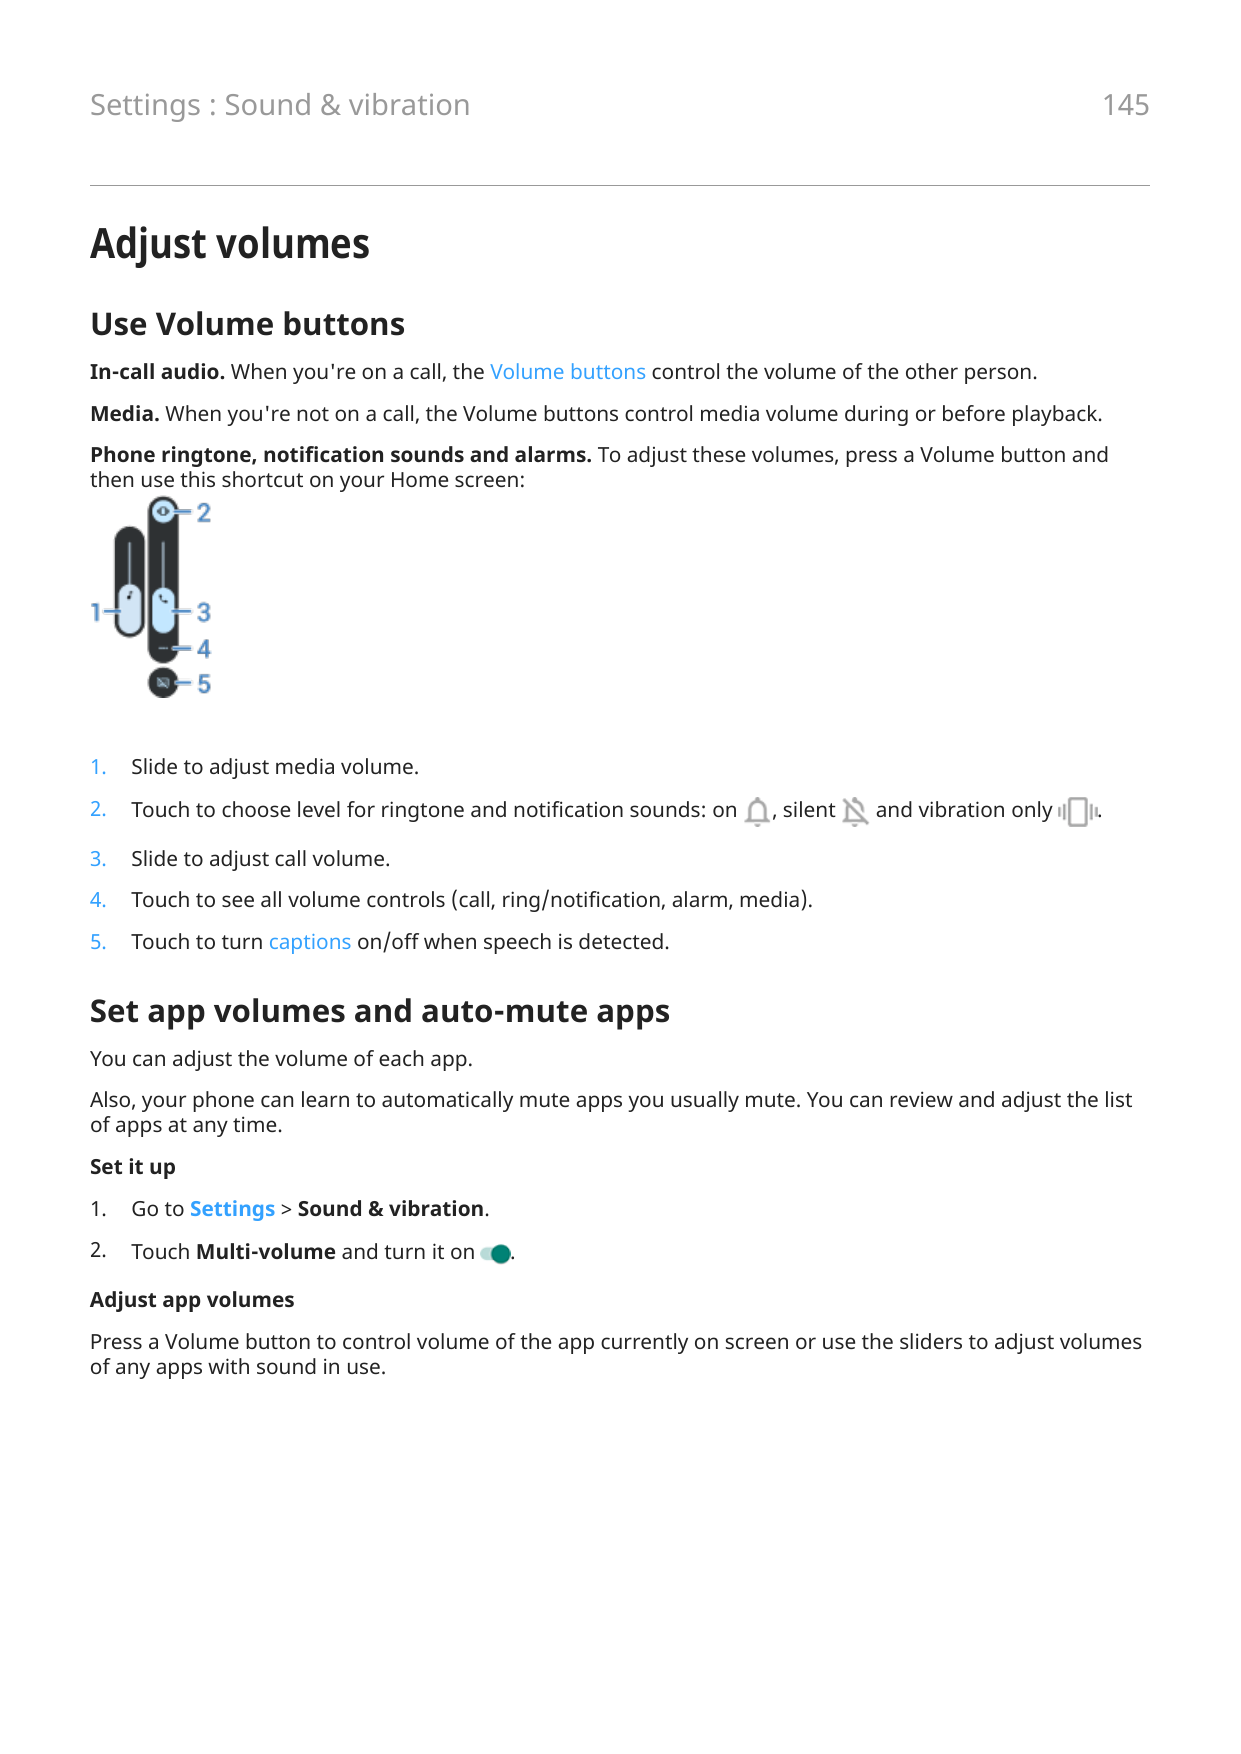 145Settings : Sound & vibrationAdjust volumesUse Volume buttonsIn-call audio. When you're on a call, the Volume buttons control 